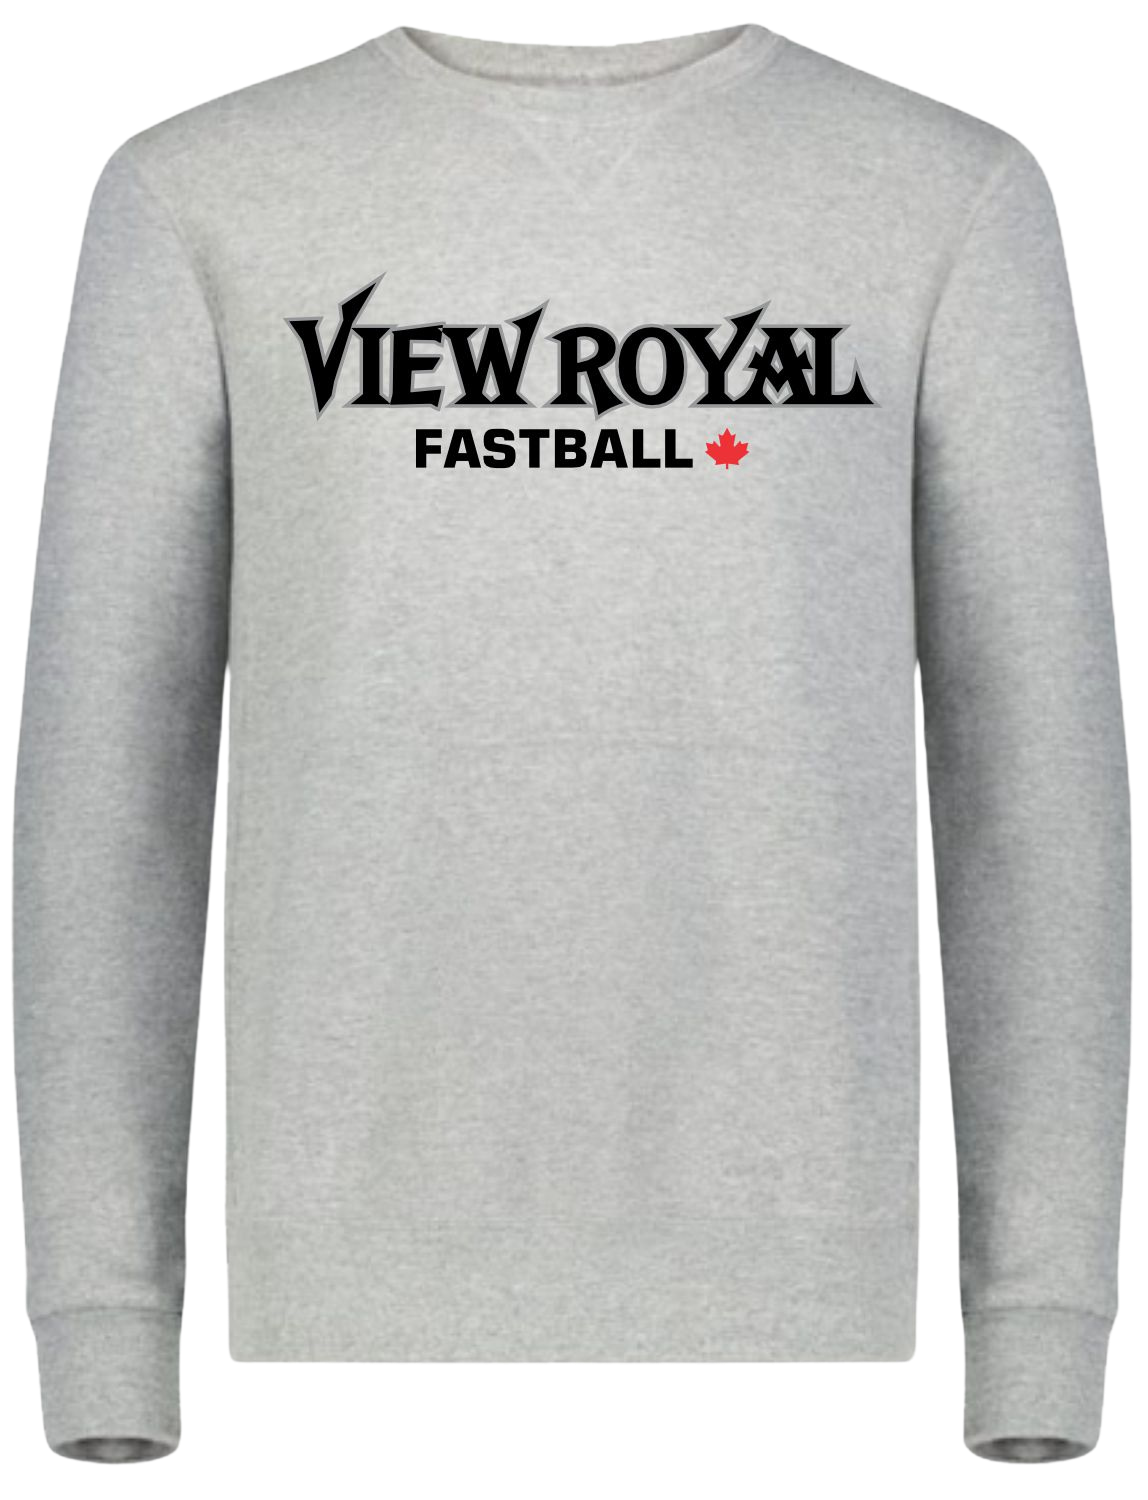 View Royal Fastball Unisex and Youth Crewneck Sweatshirt